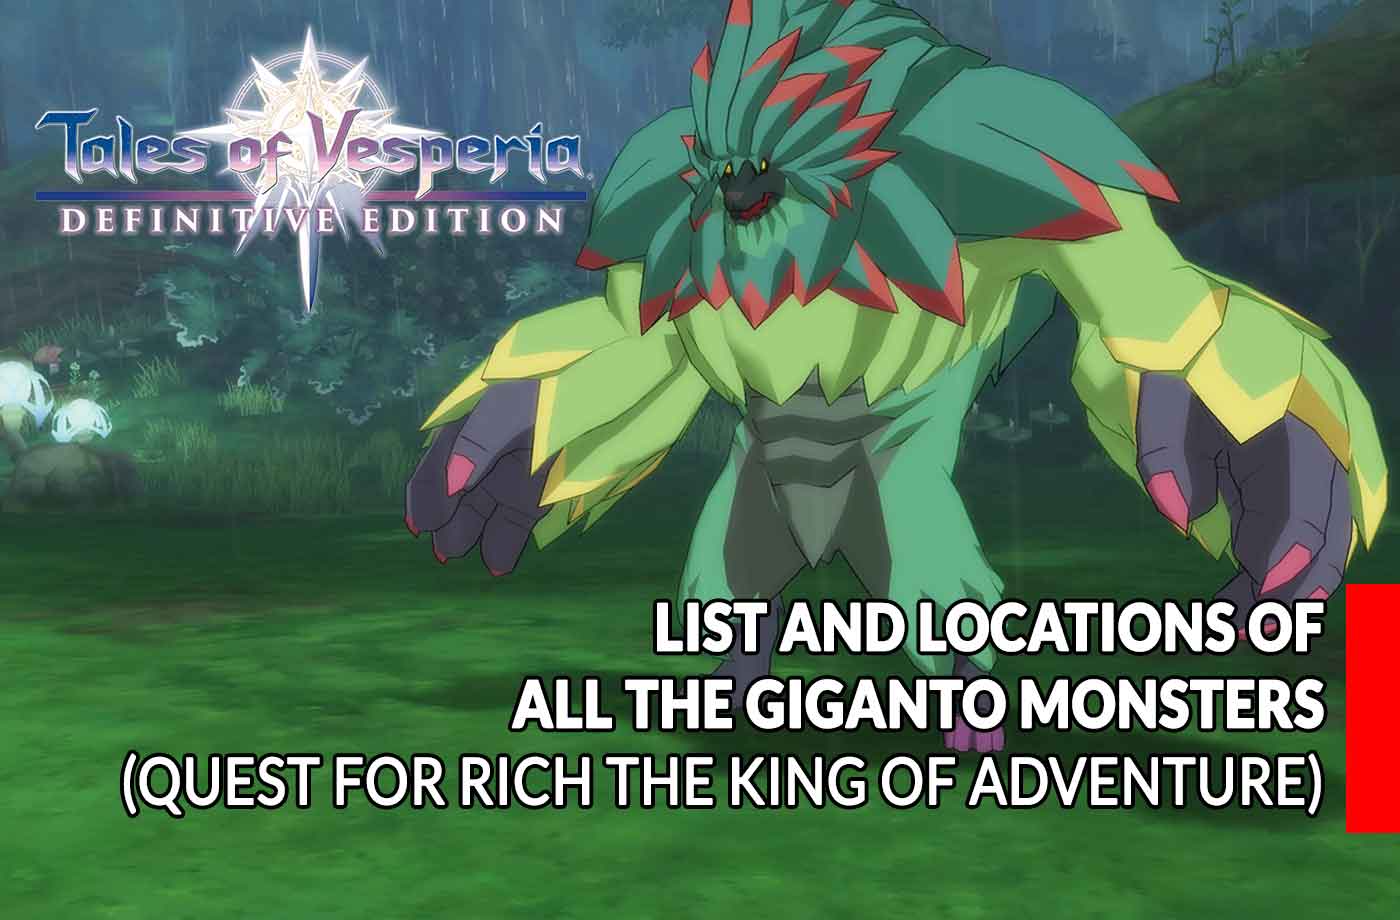 Guide Tales of Vesperia Definitive Edition optional quest where are located all the Giganto monsters Kill The Game